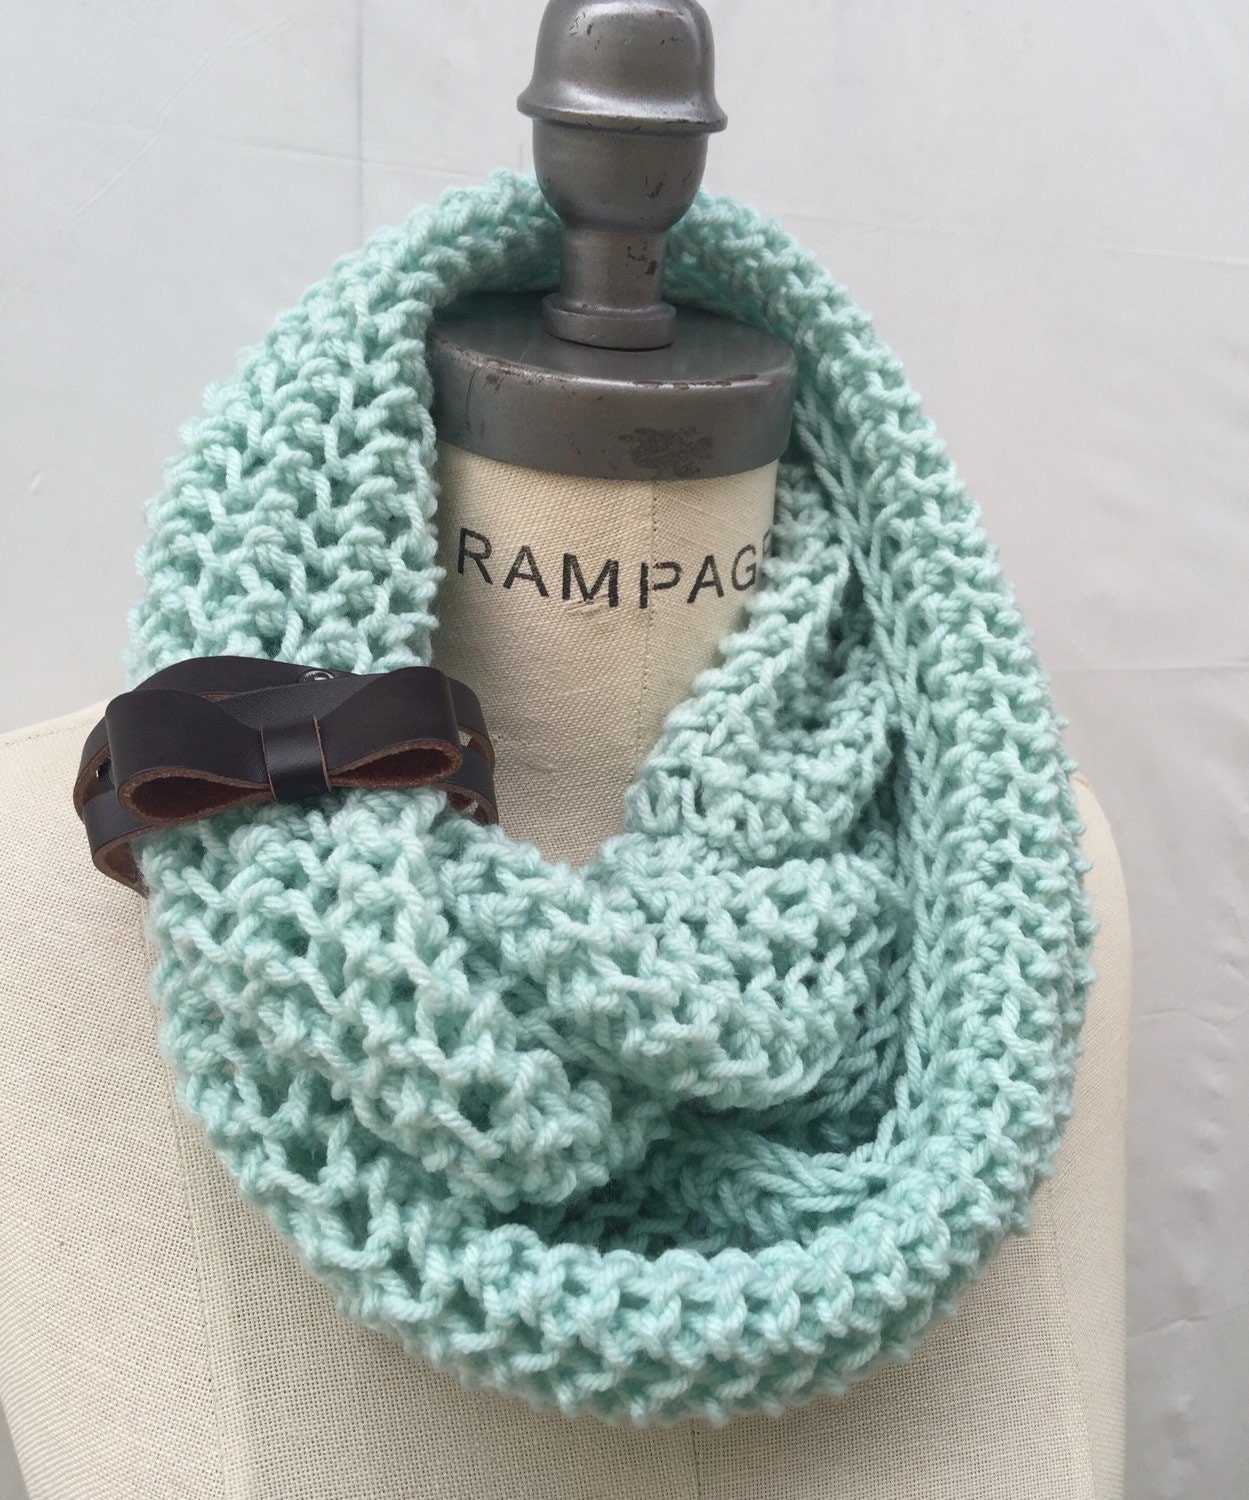 Best Selling item Items hand knit knitted Mint Green infinity